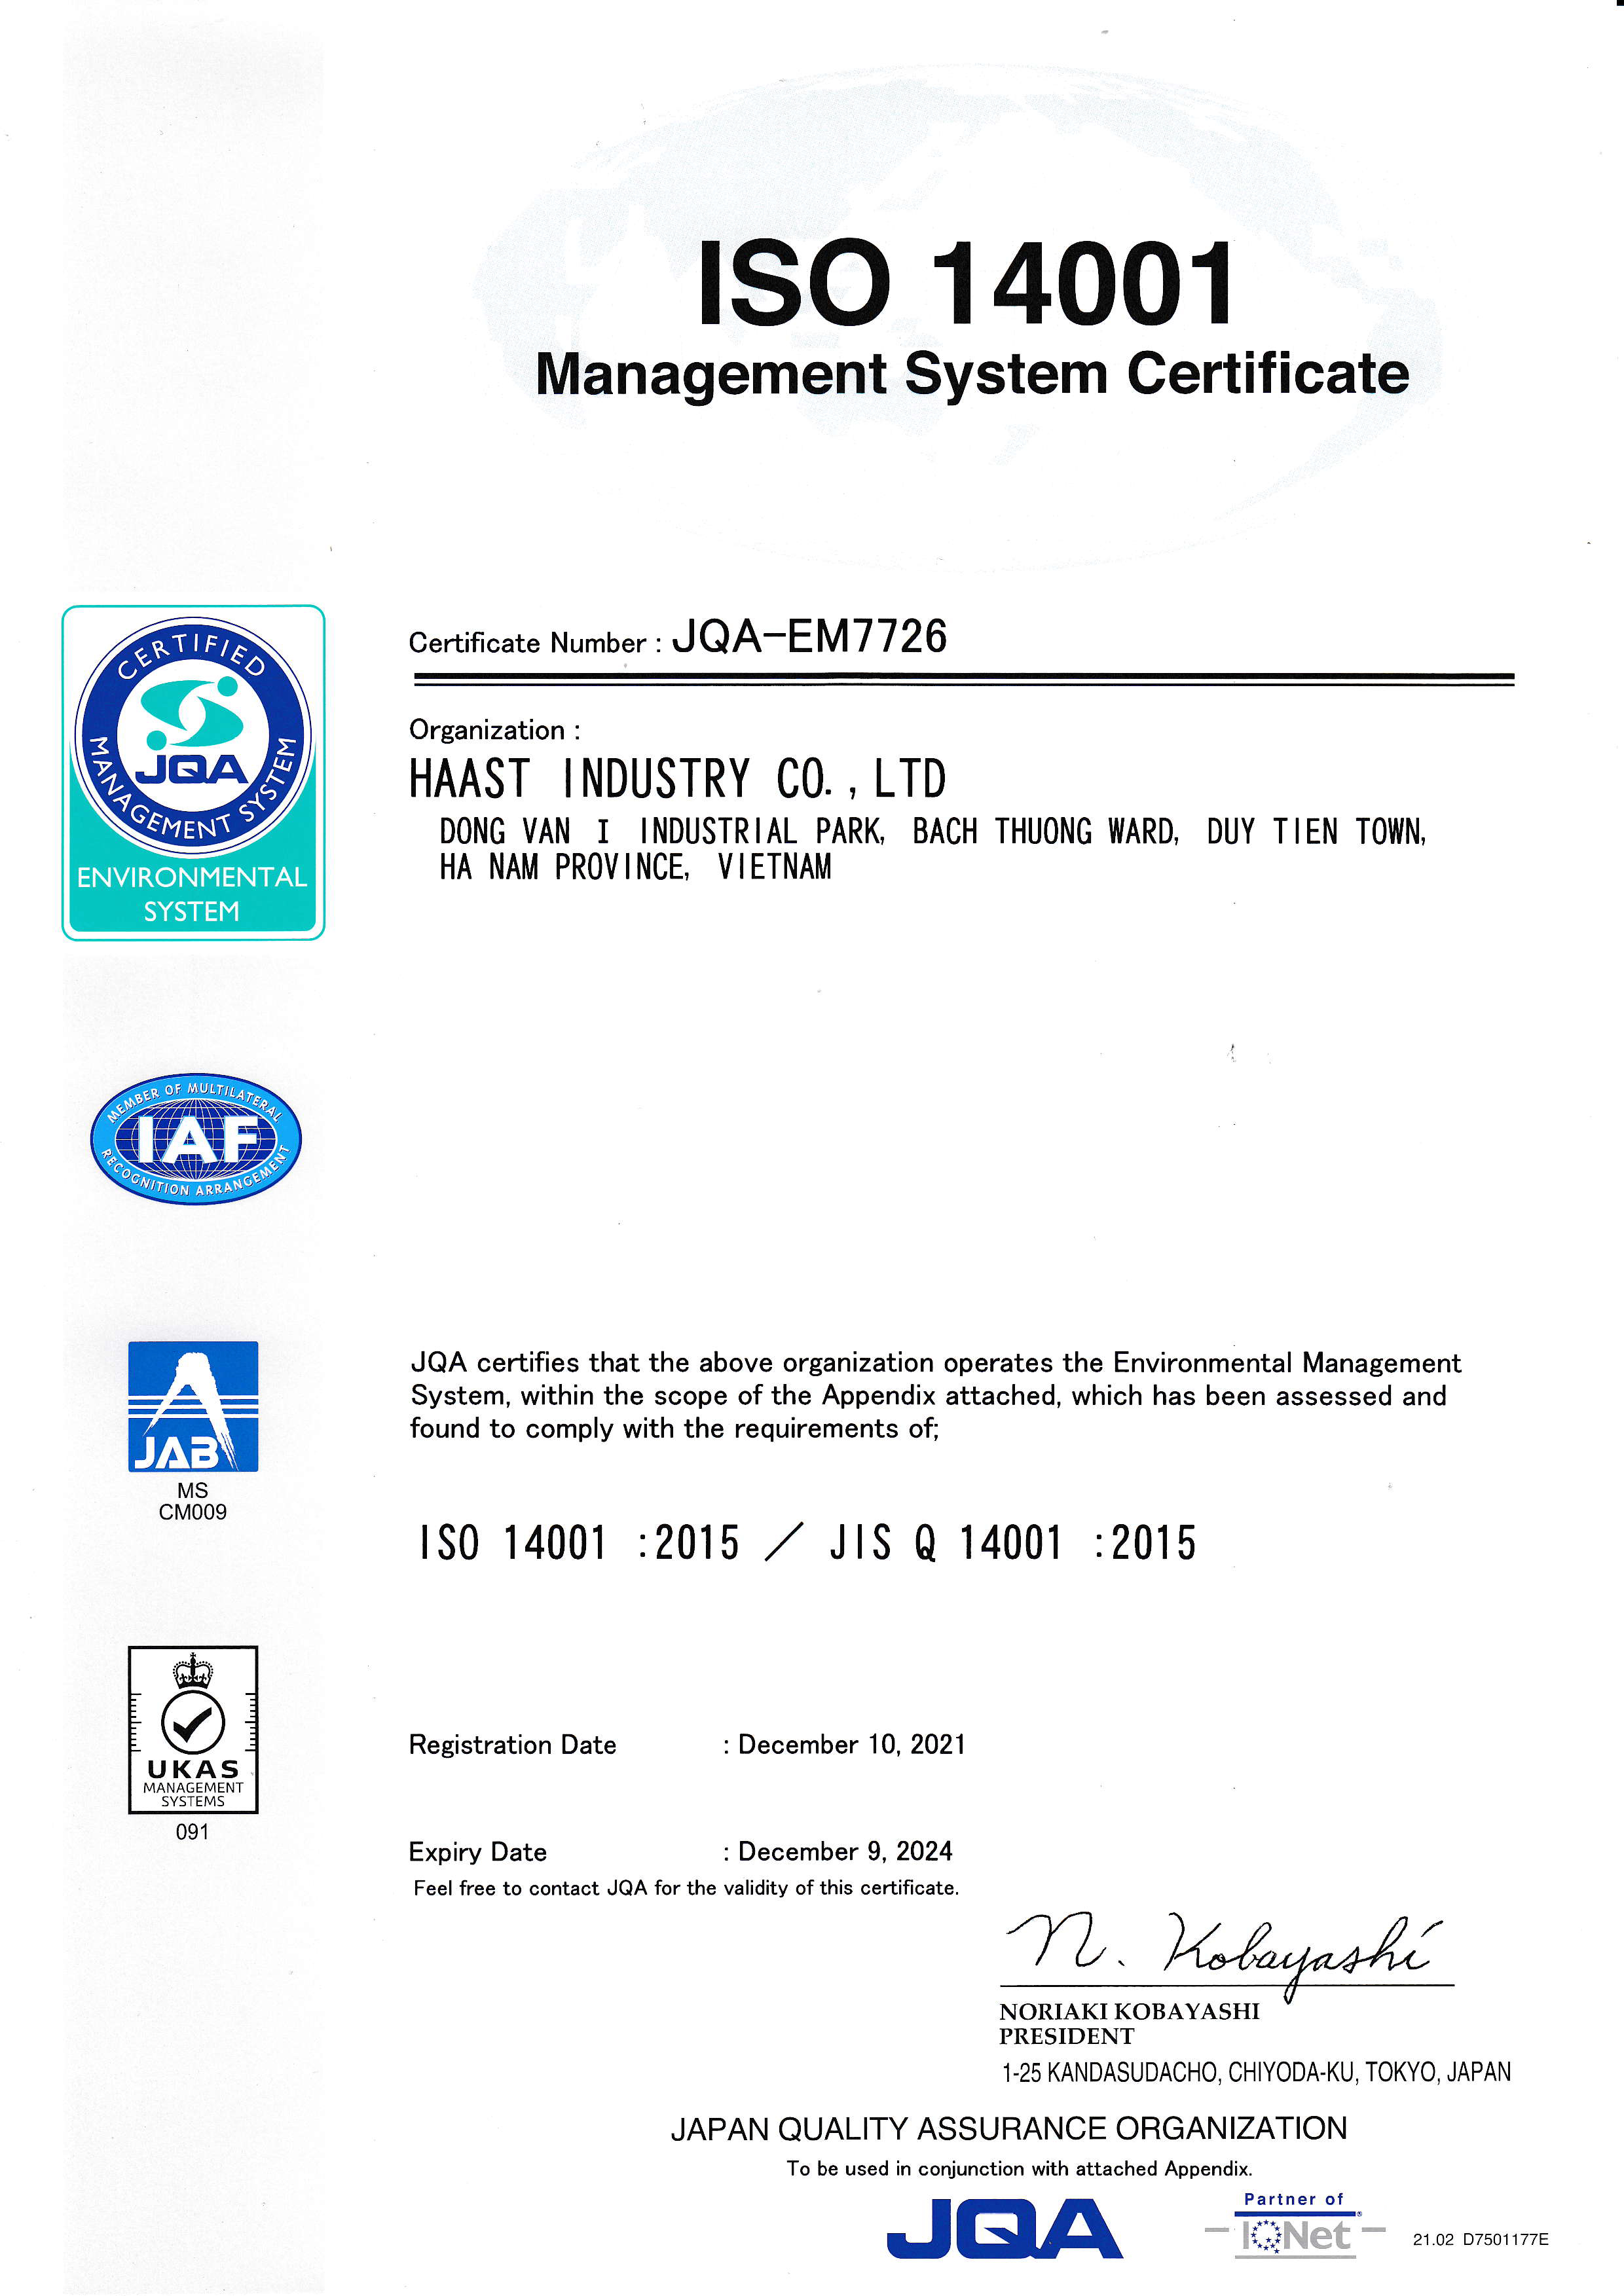 [HAAST] ISO 14001 Management System Certificate-3